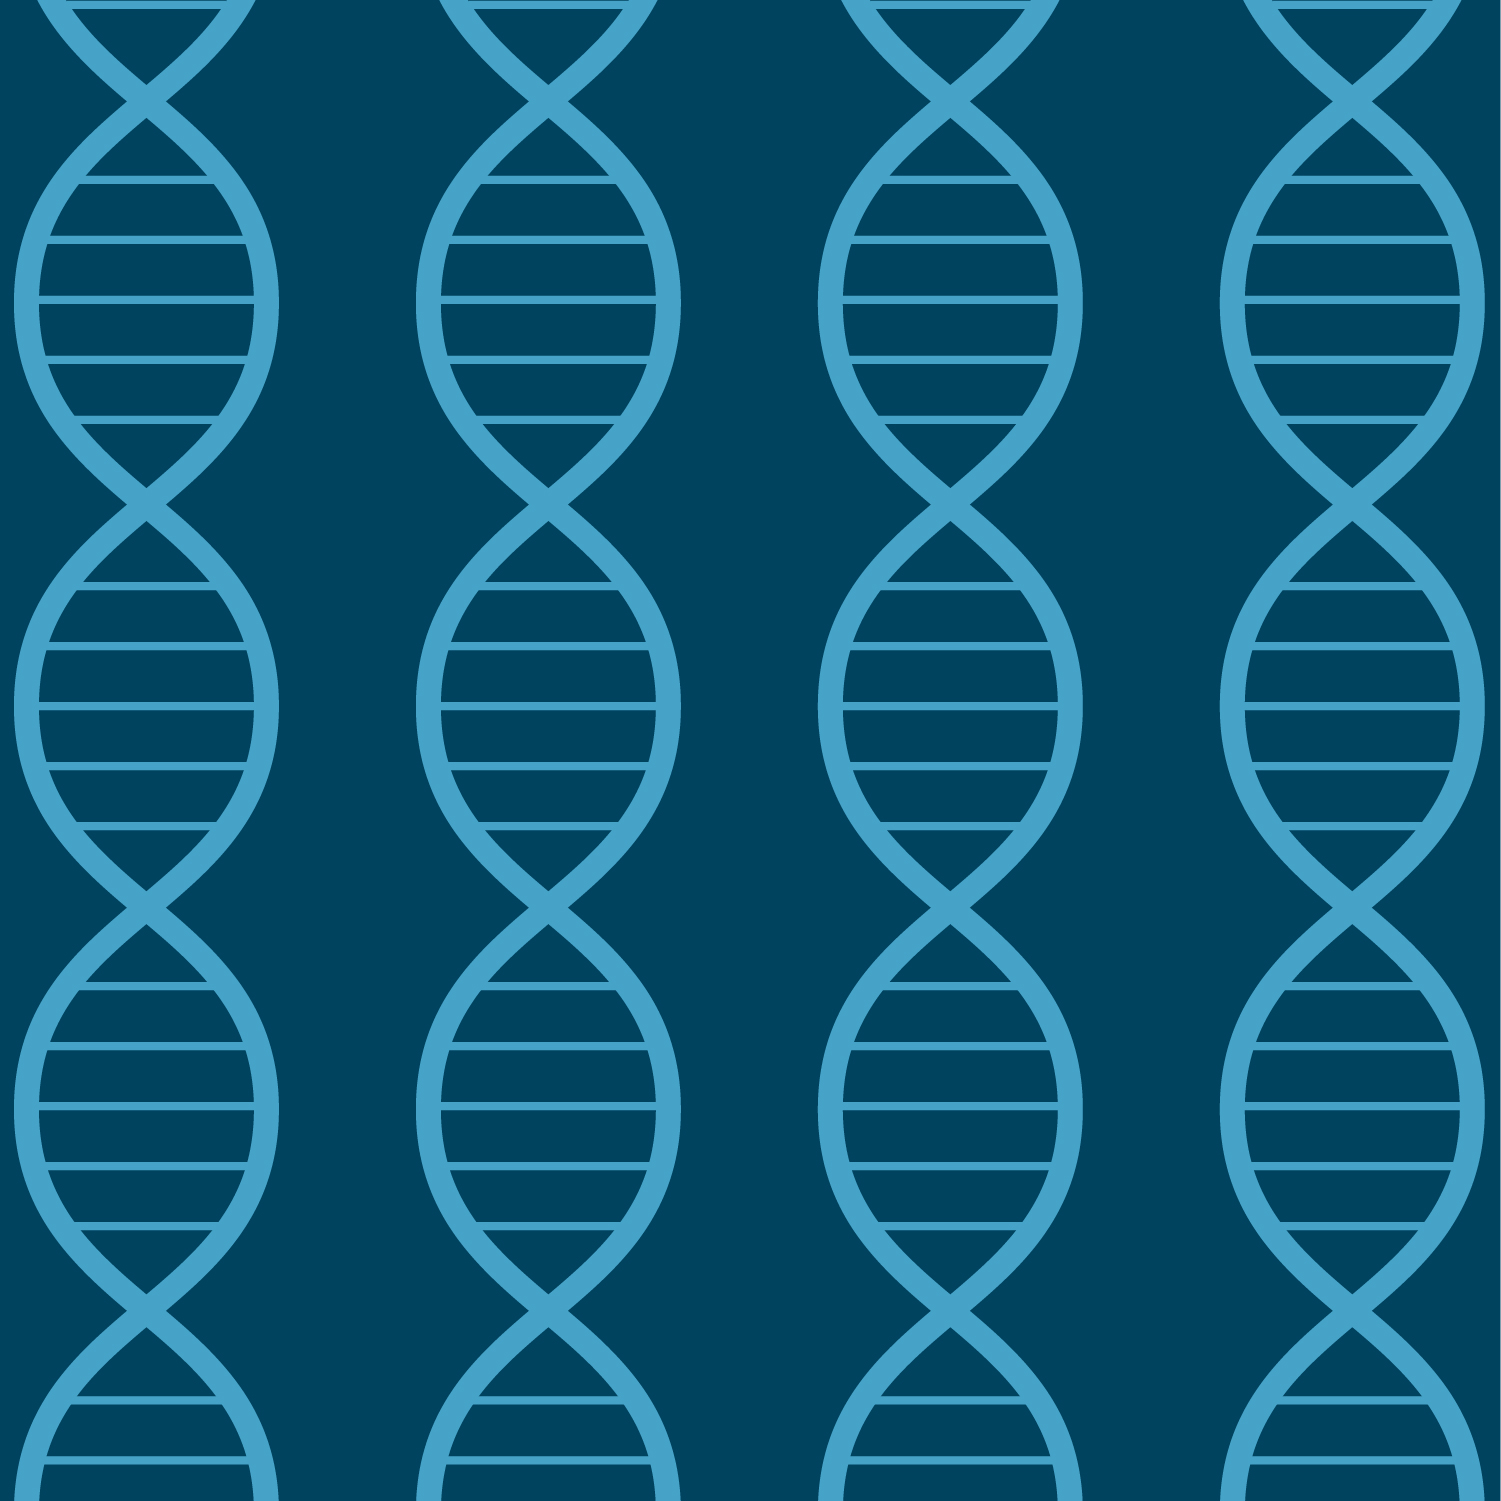 Simple DNA drawing in white with a dark teal background.